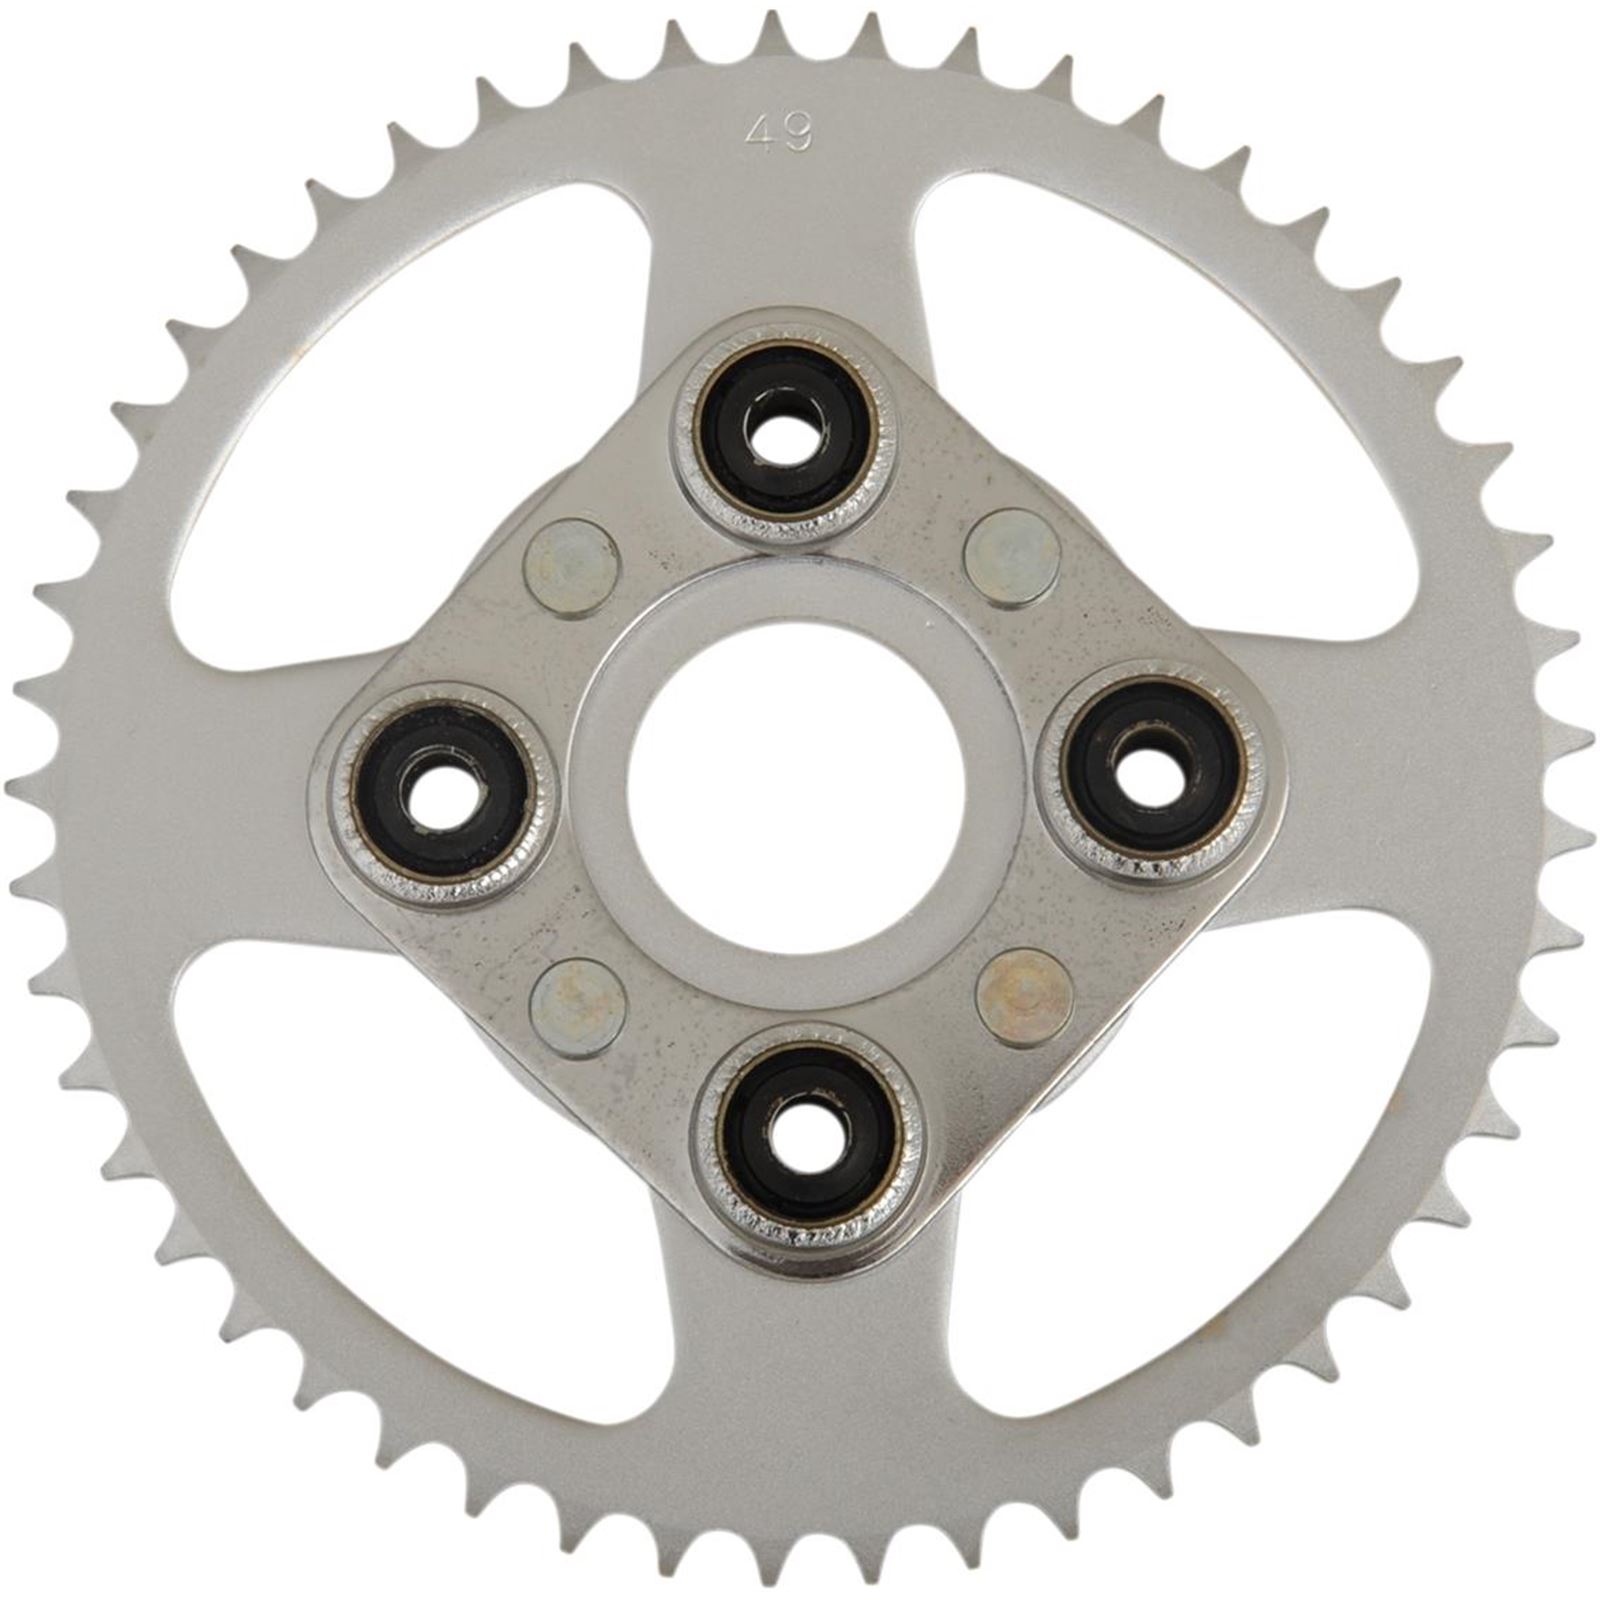 Parts Unlimited Rear Sprocket for Honda 428 - 49-Tooth